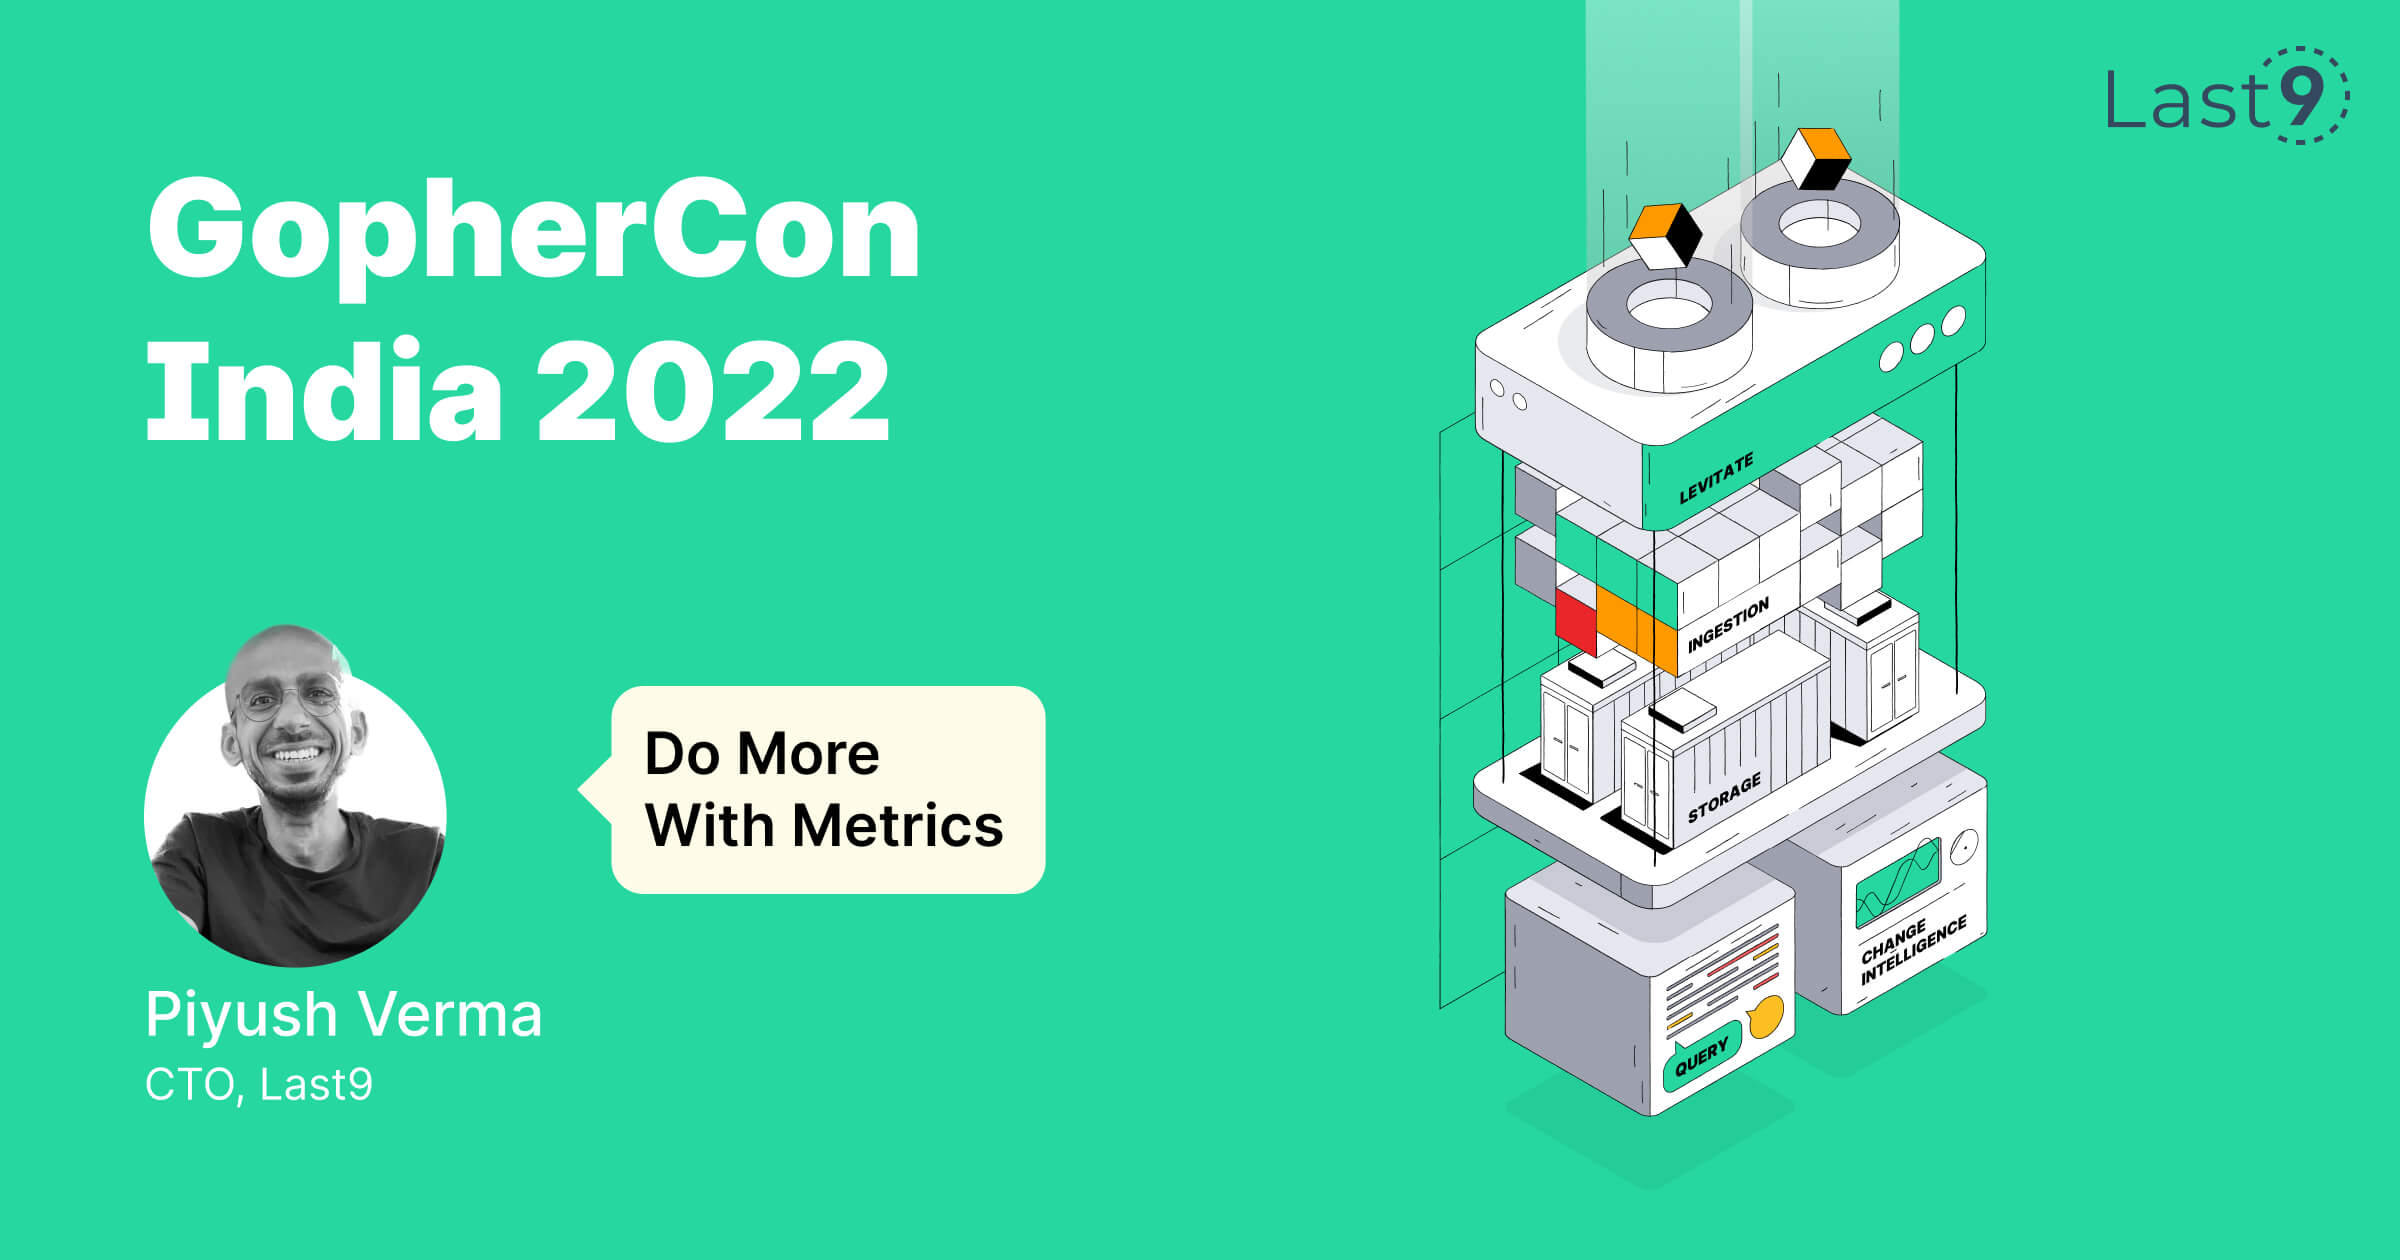 Do more with your metrics by Piyush Verma at GopherConIndia 2022